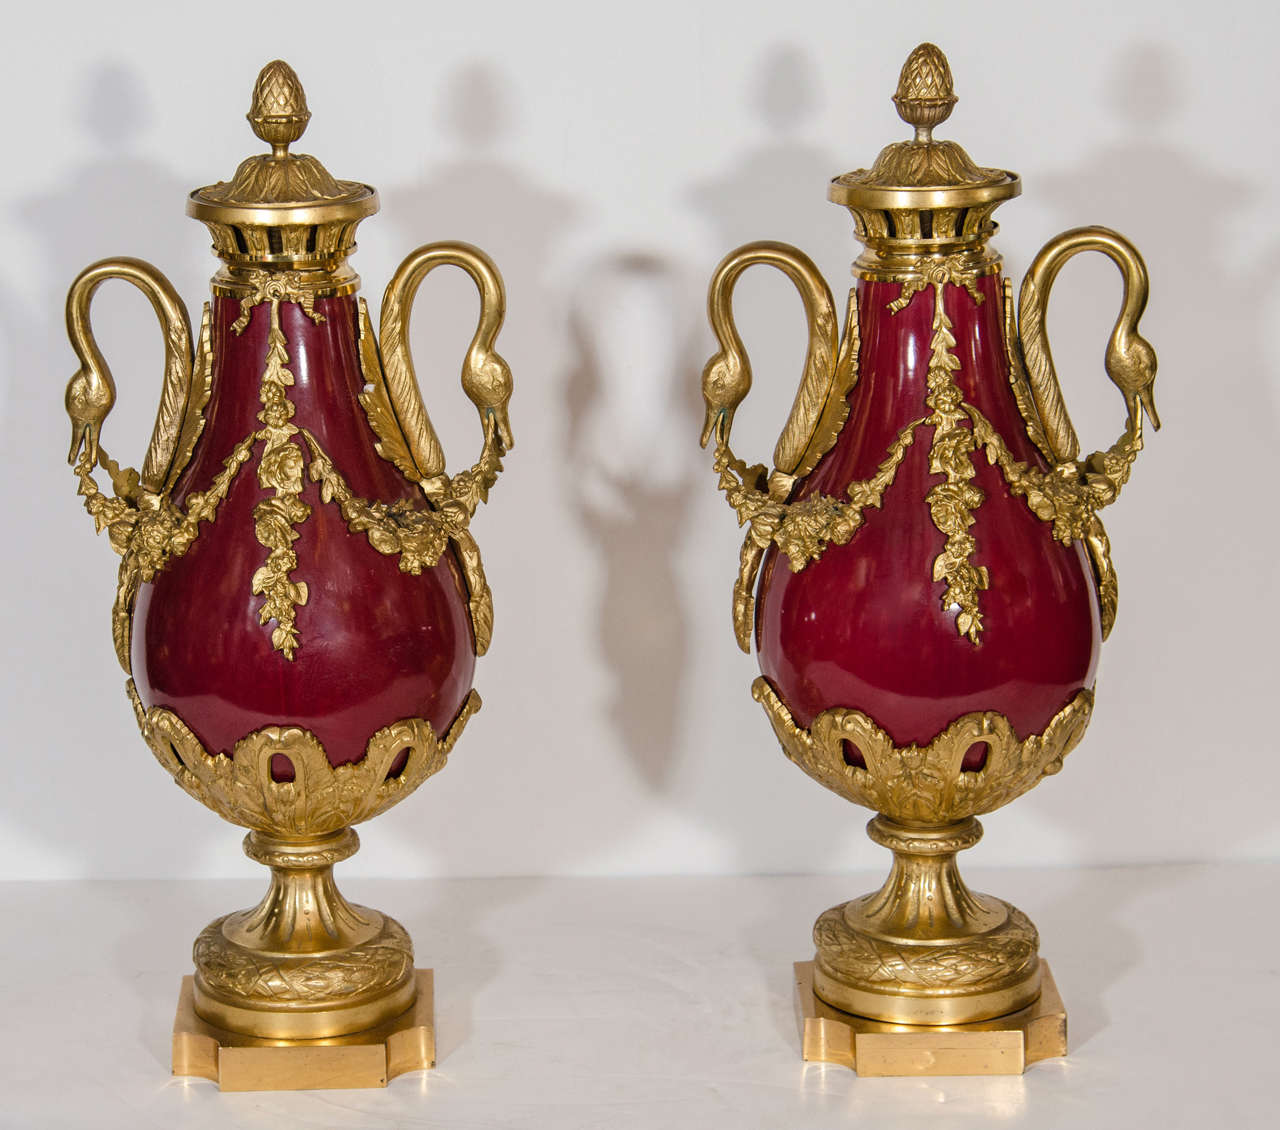 Pair of antique French Louis XVI style gilt bronze and red sevres style porcelain covered urns embellished with gilt bronze swan handles and further adorned with floral wreaths.